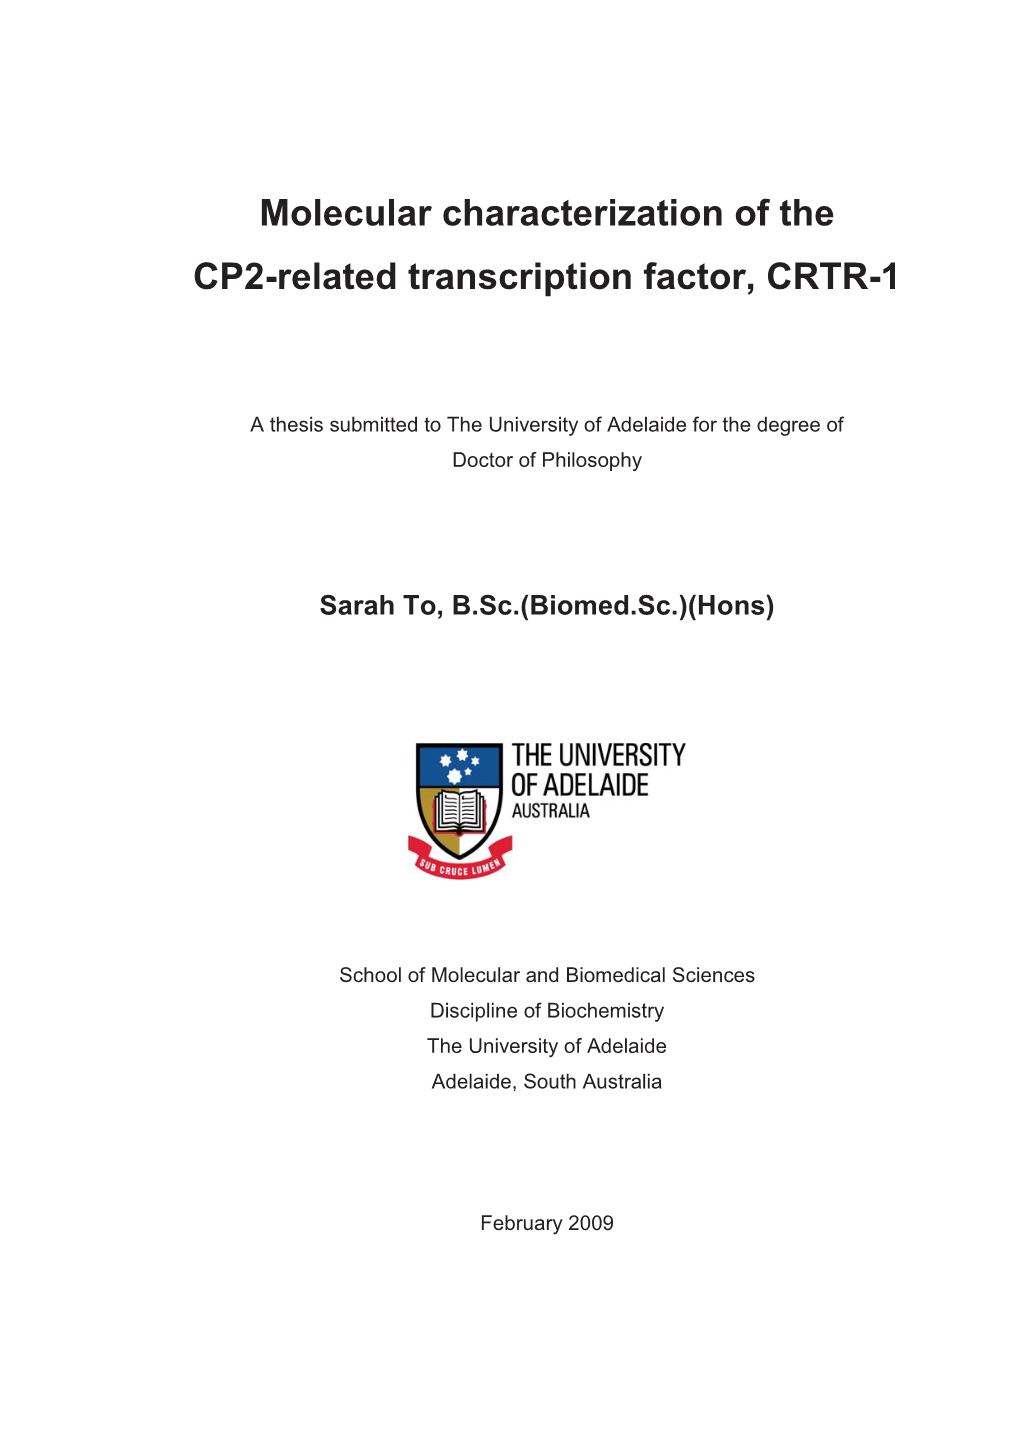 Molecular Characterization of the CP2-Related Transcription Factor, CRTR-1